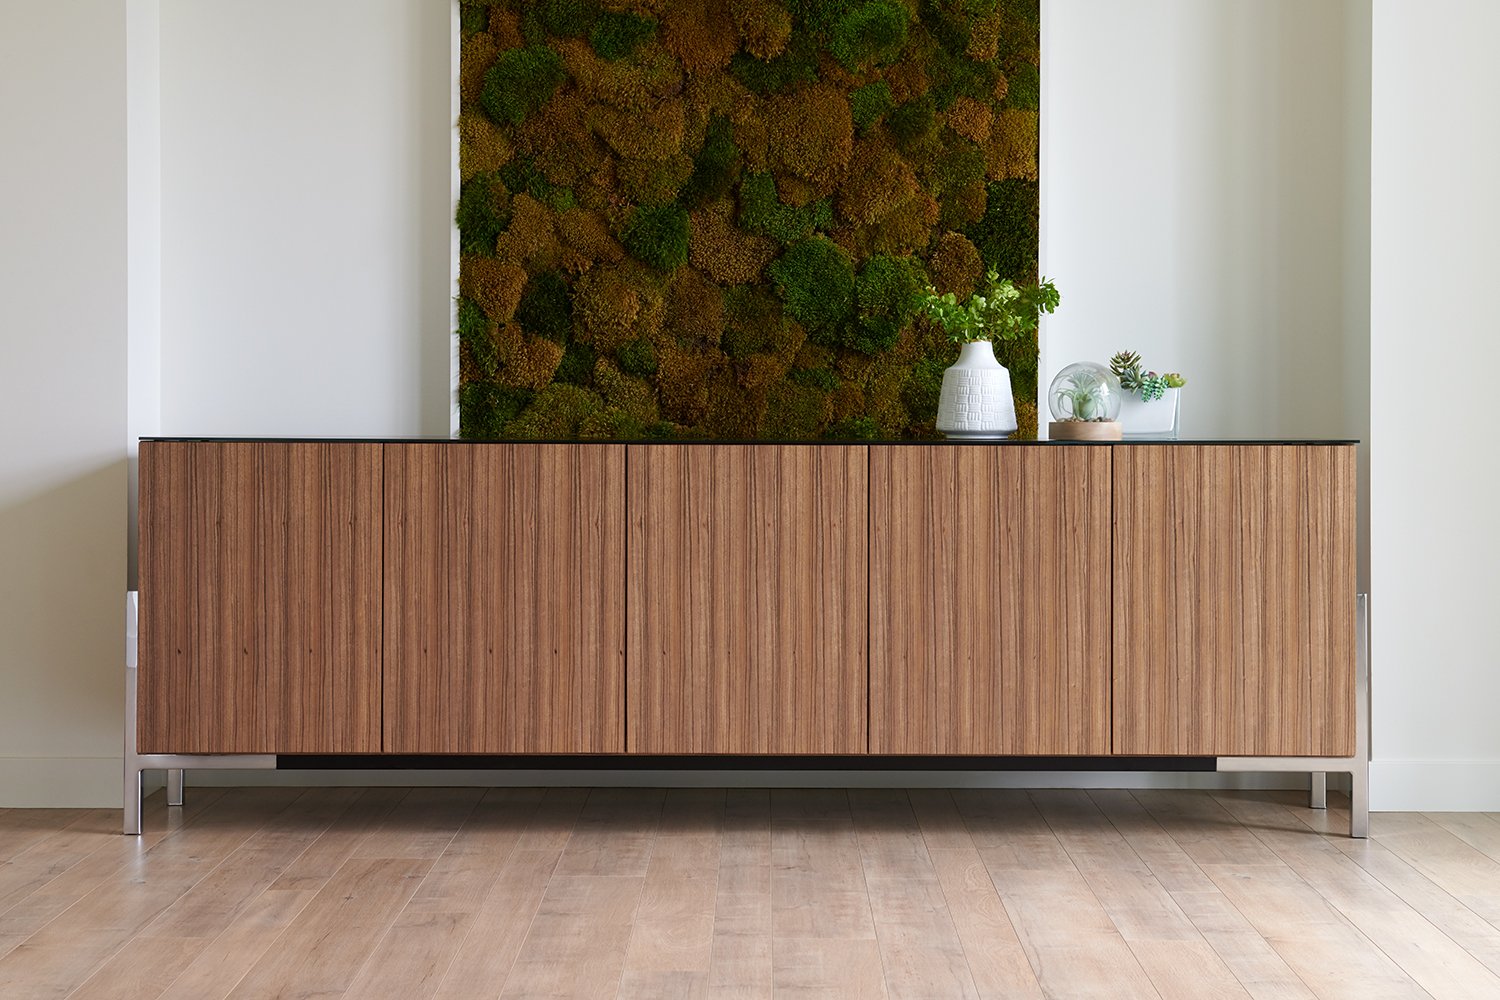 Credenza with living wall above